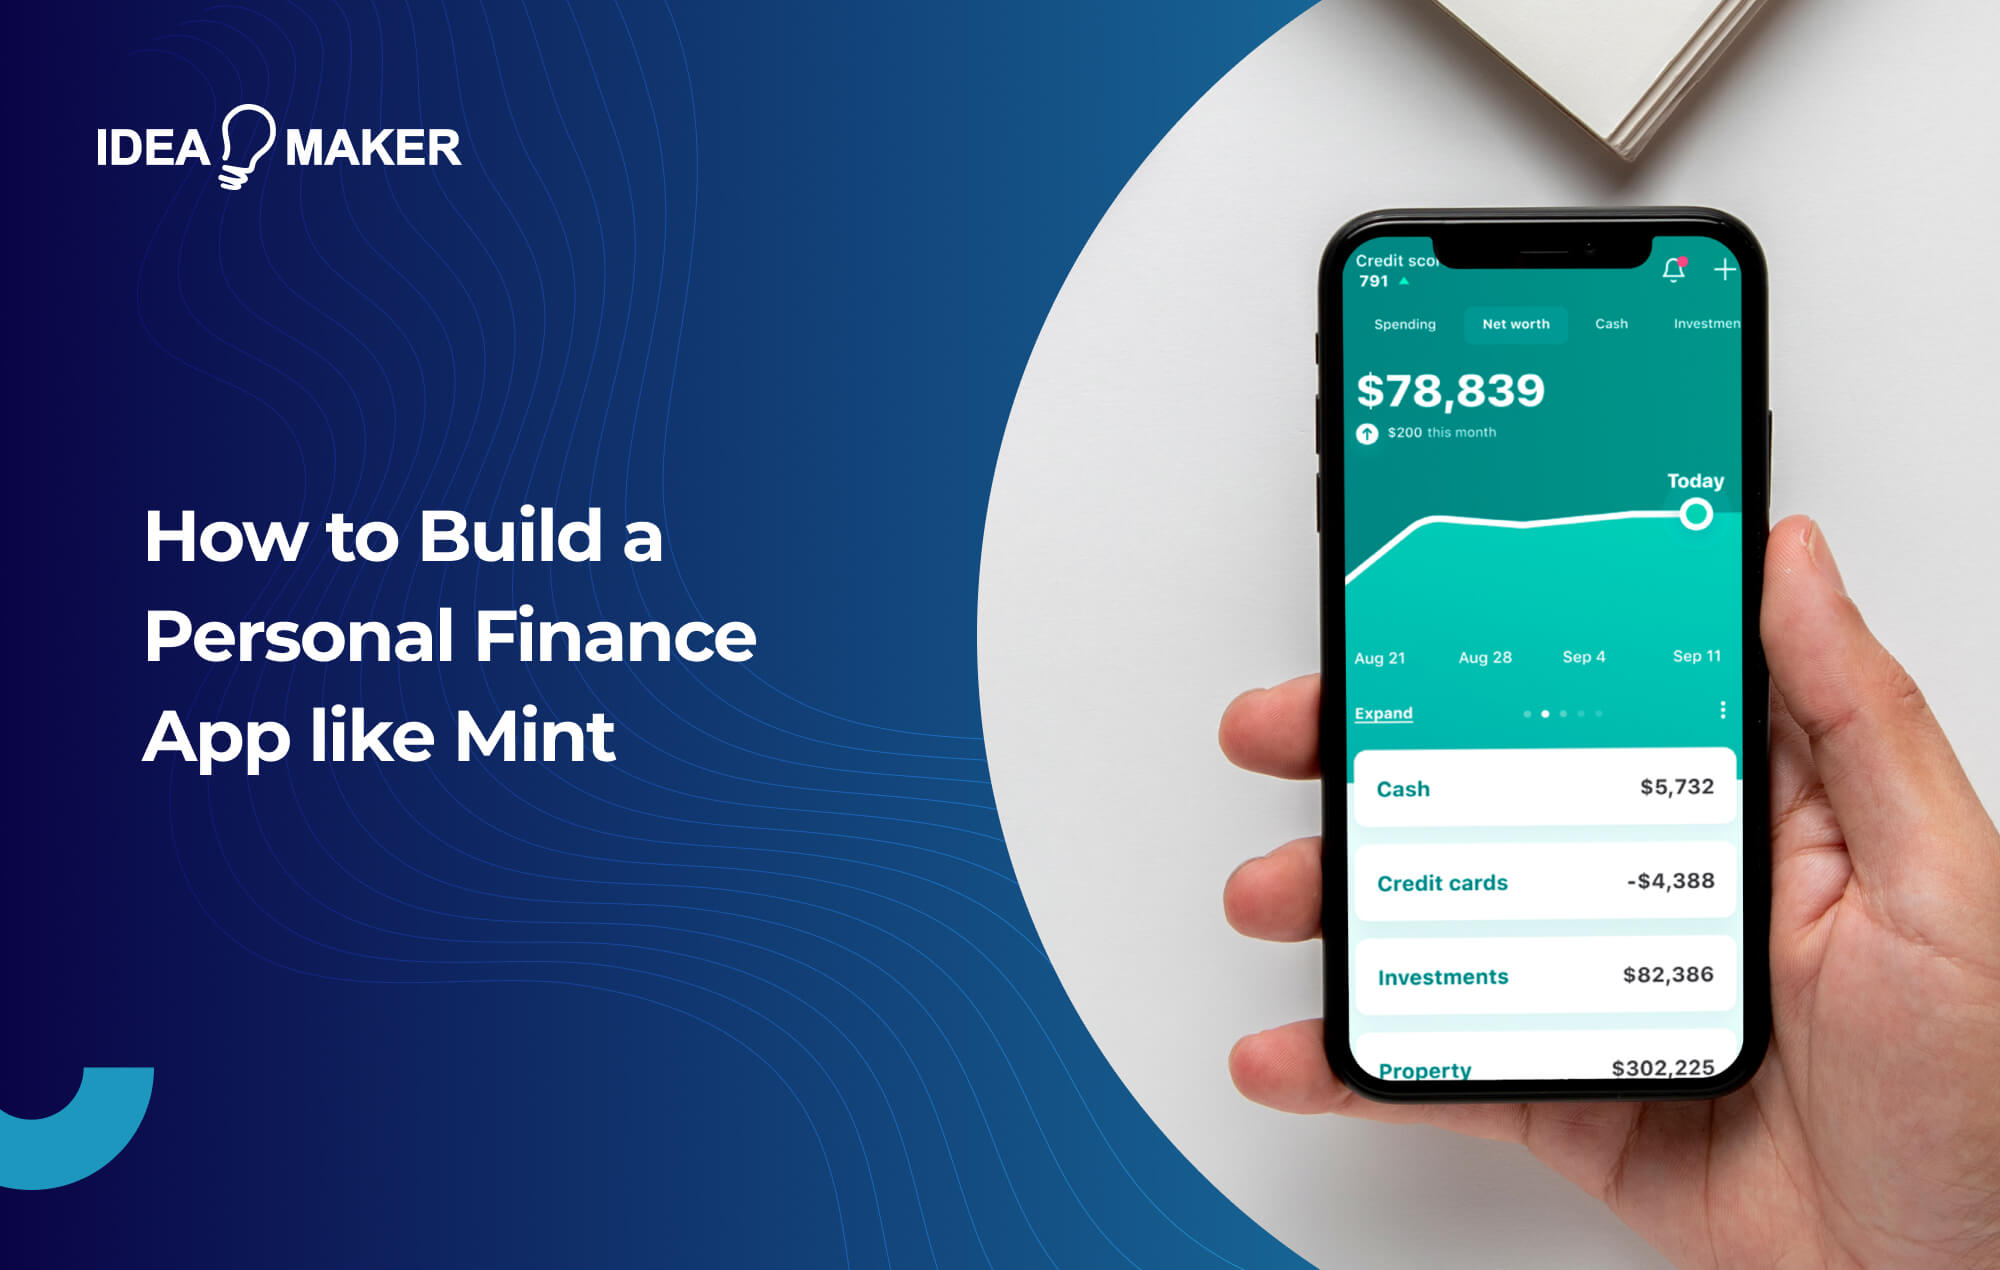 How to Build a Personal Finance App like Mint